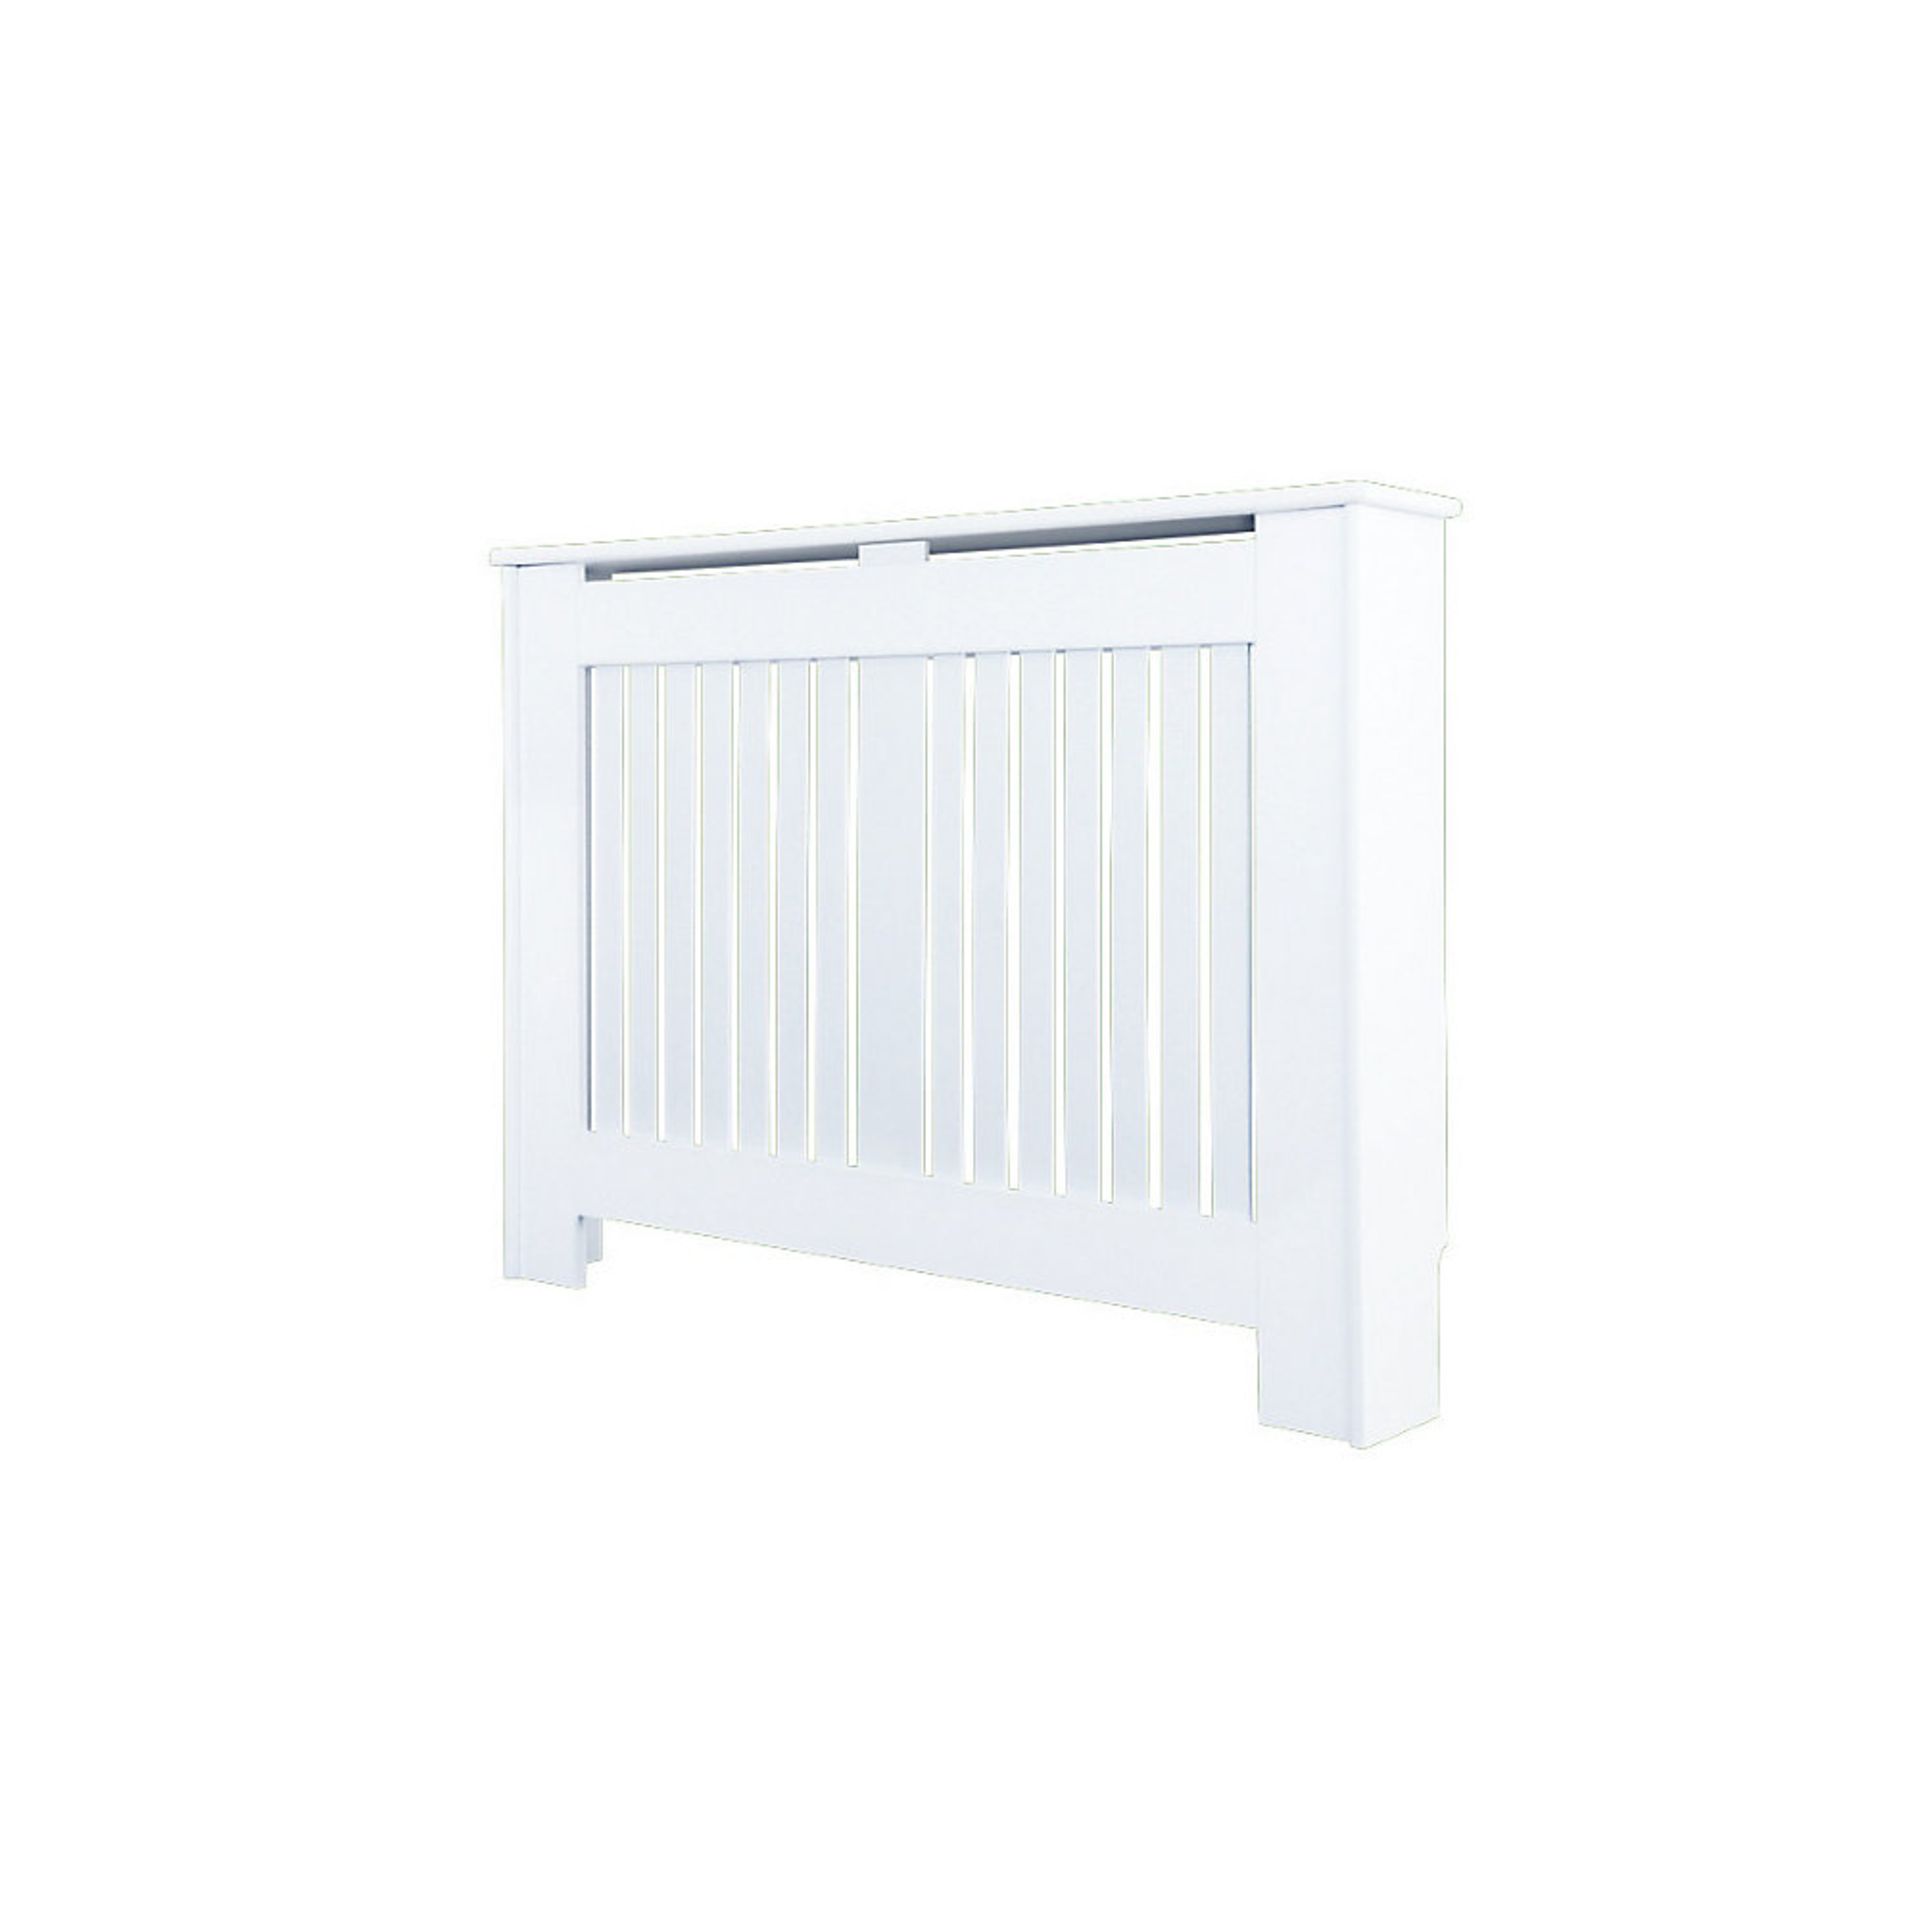 NEW (C124) CONTEMPORARY KENSINGTON RADIATOR COVER MEDIUM WHITE 1195 X 200 X 900MM. Ideal for co... - Image 2 of 2